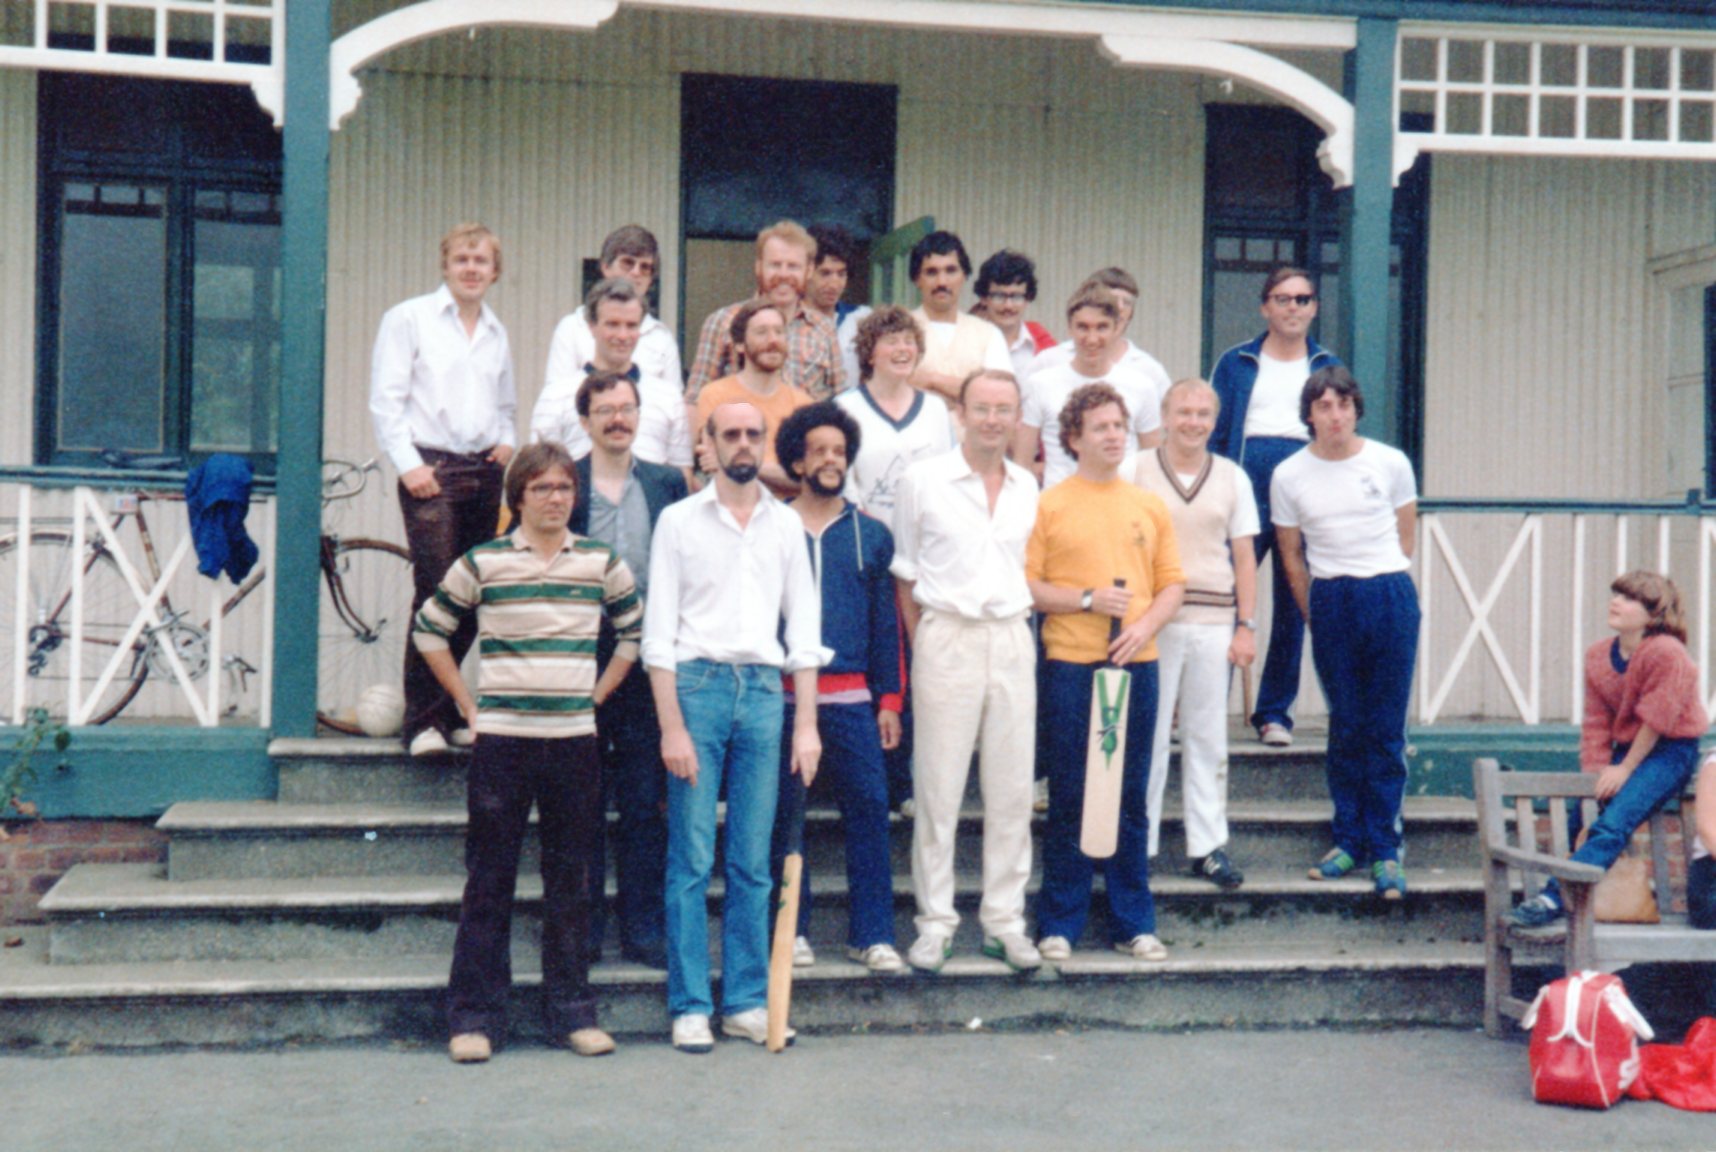 A group of men standing in the entrance to a cricket pavilion